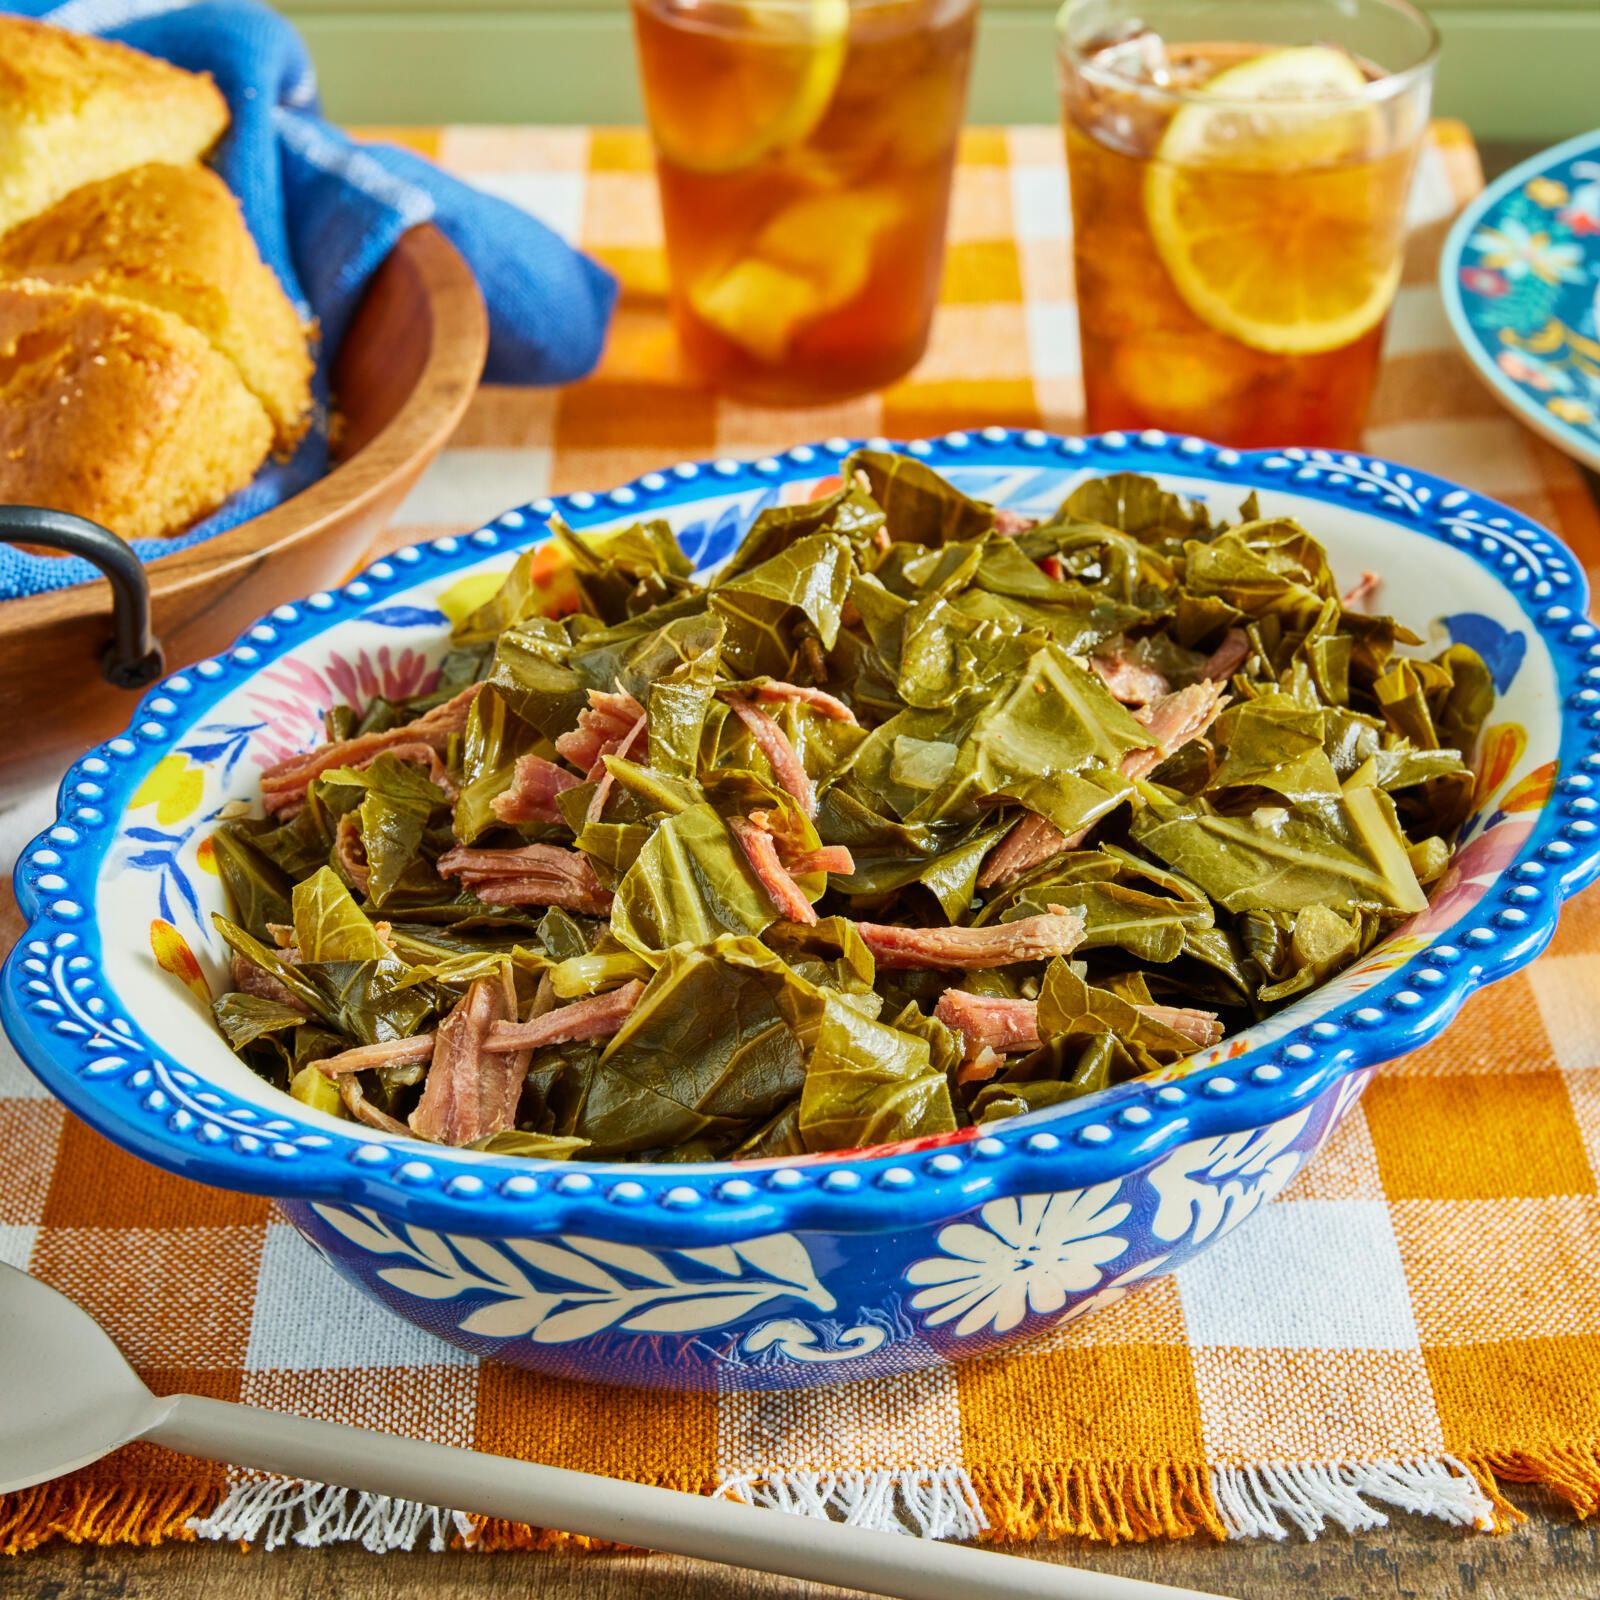 Don't forget your collard greens!